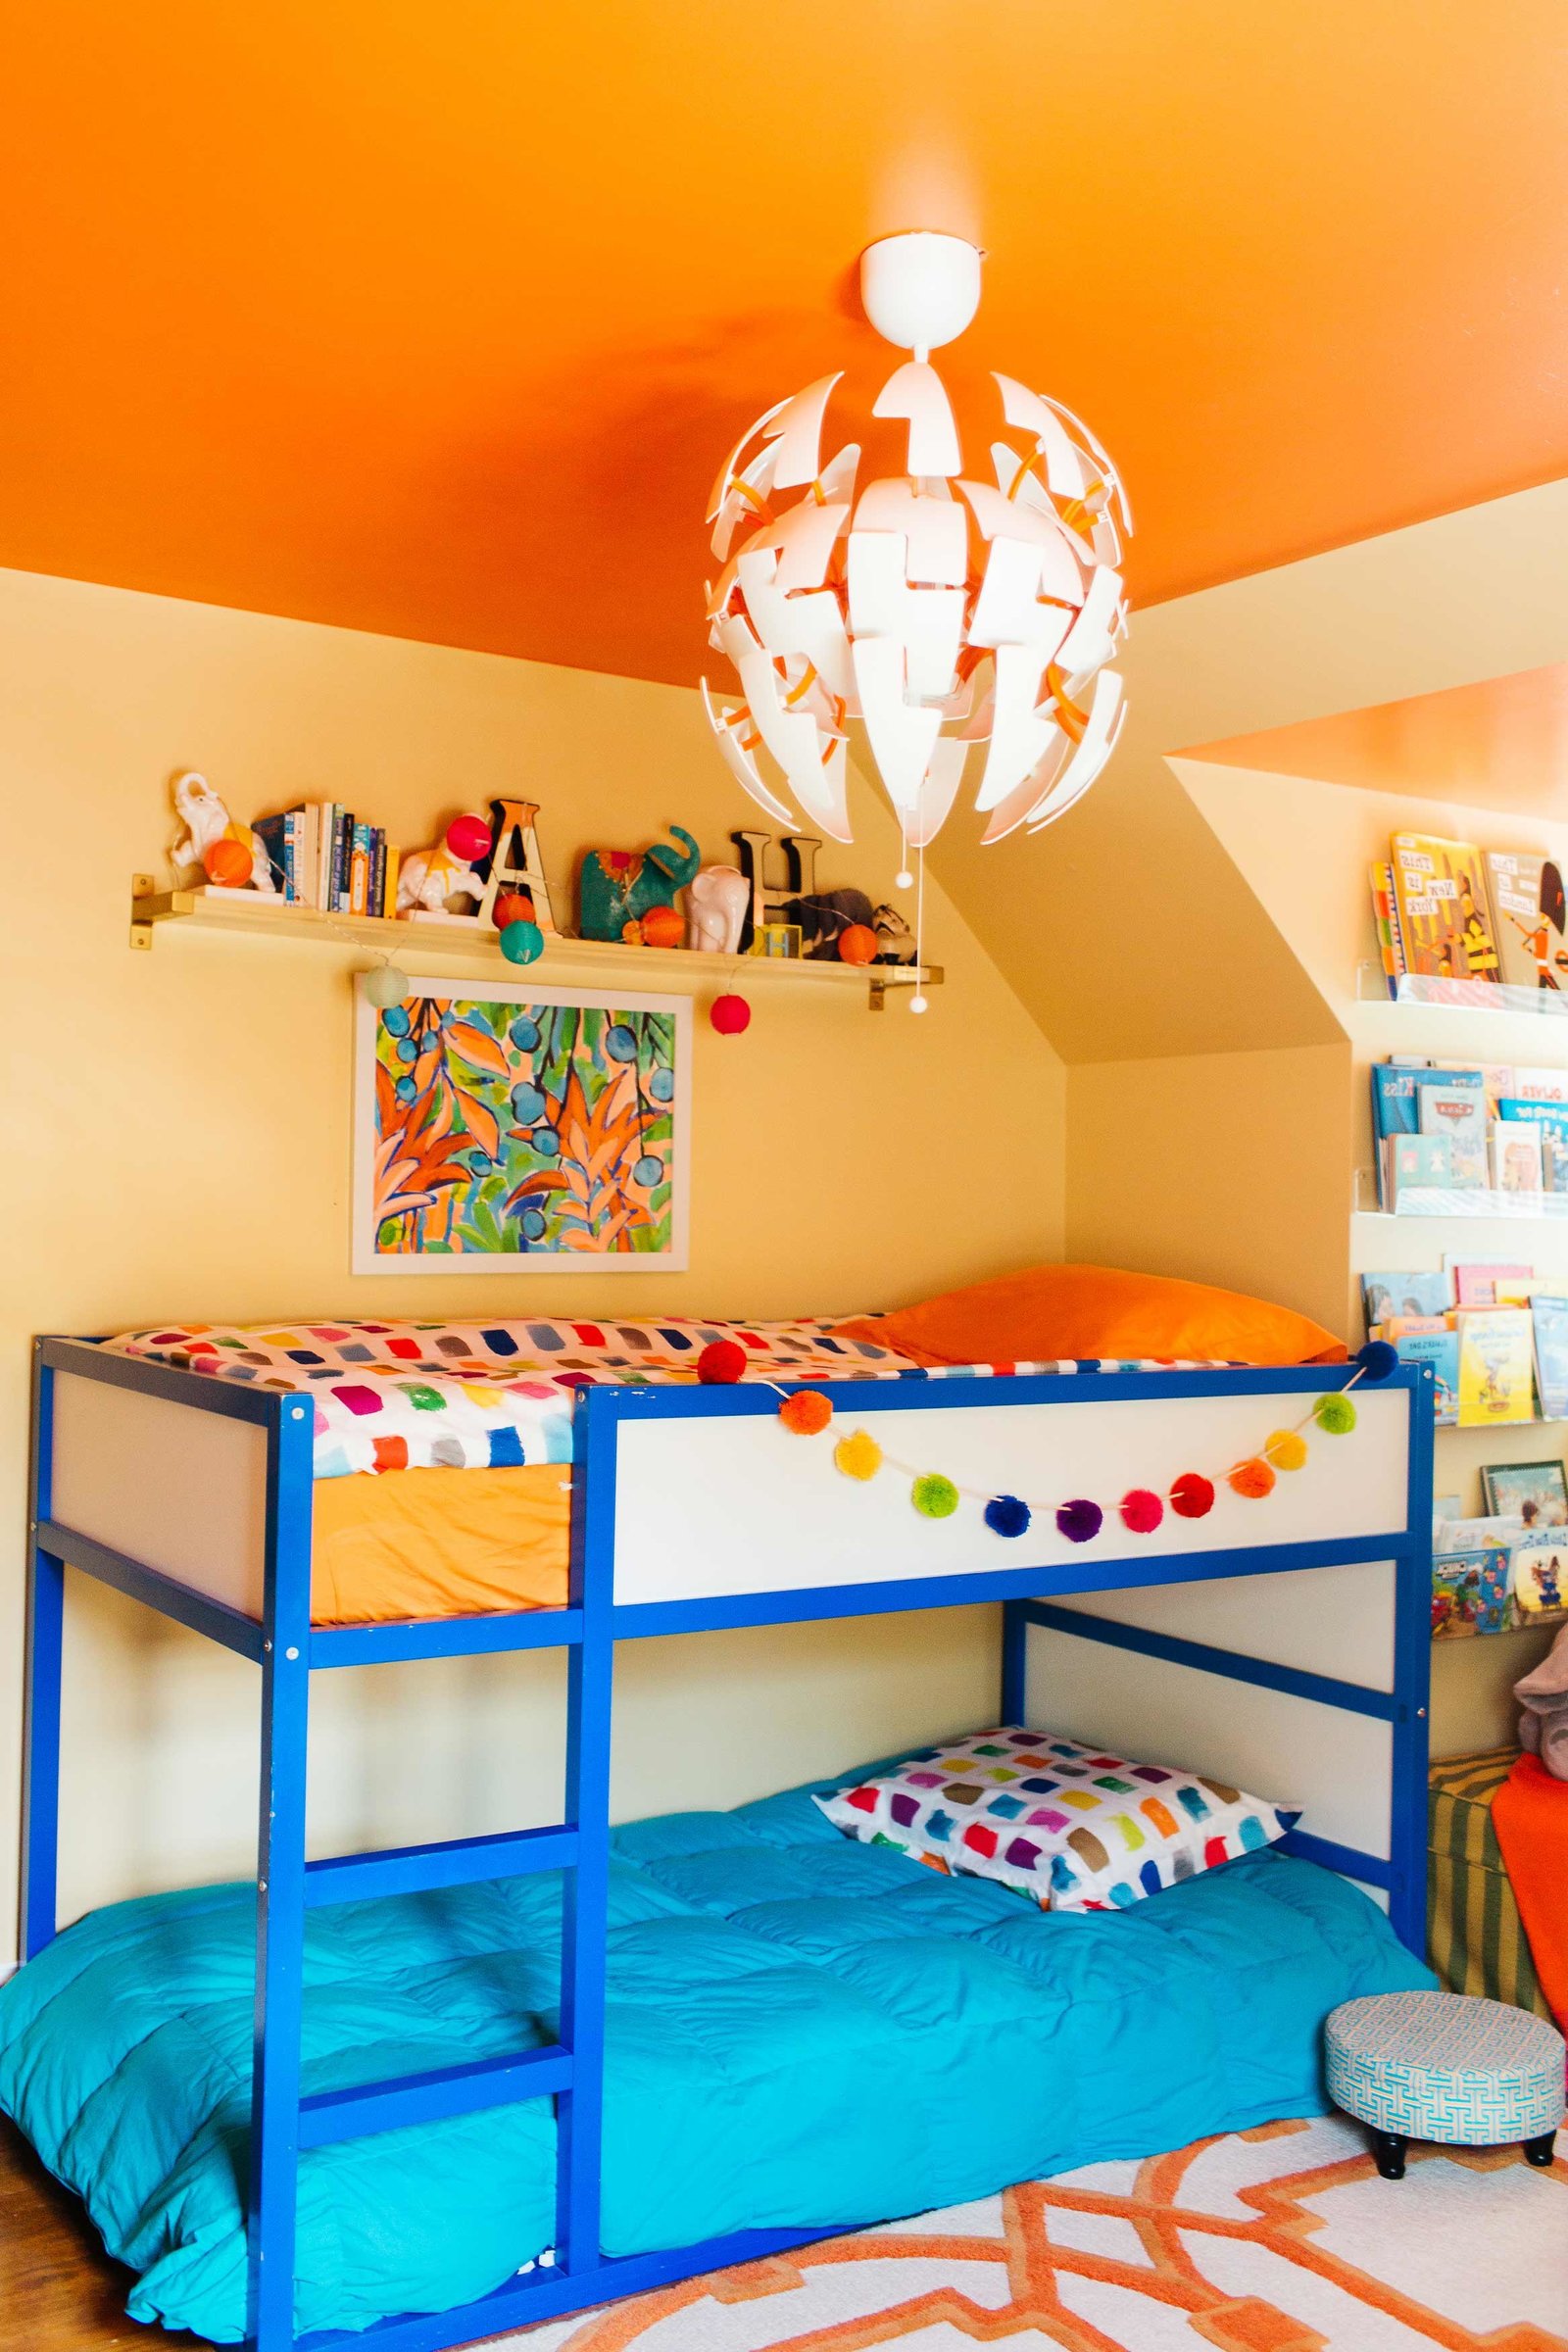 A boys bedroom with blue bunk beds and pom pom garland.